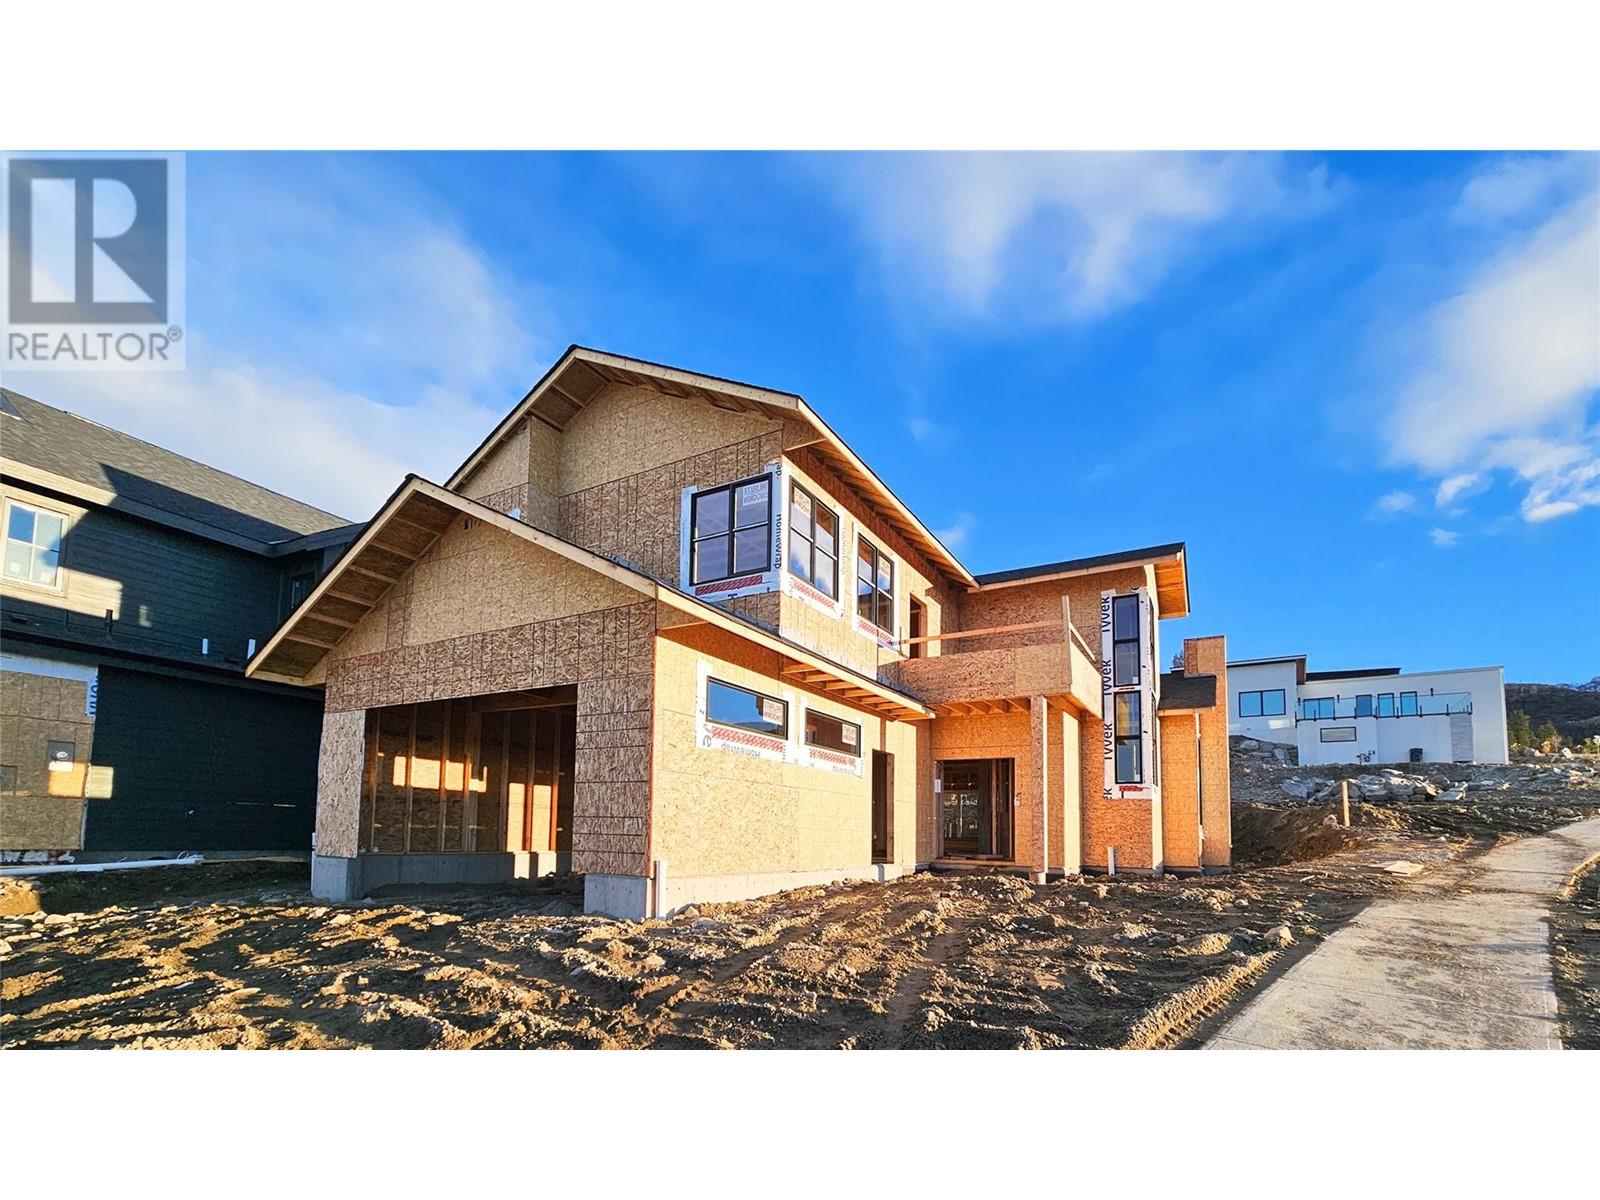 5557 Foothill Court, Kelowna, British Columbia  V1W 5A8 - Photo 11 - 10305805